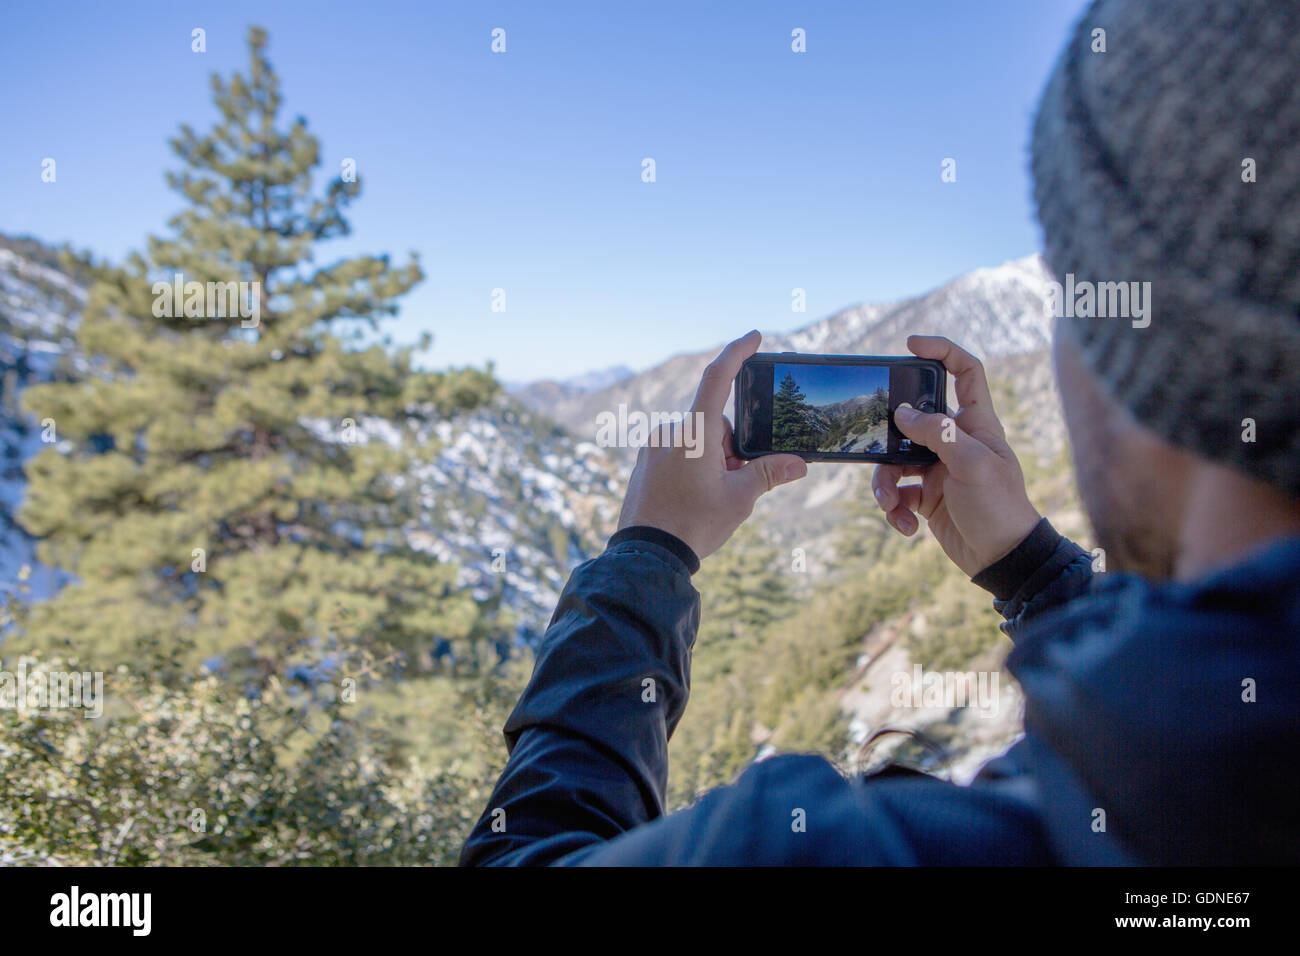 Hiker taking photograph of view, Mount Baldy, California Stock Photo